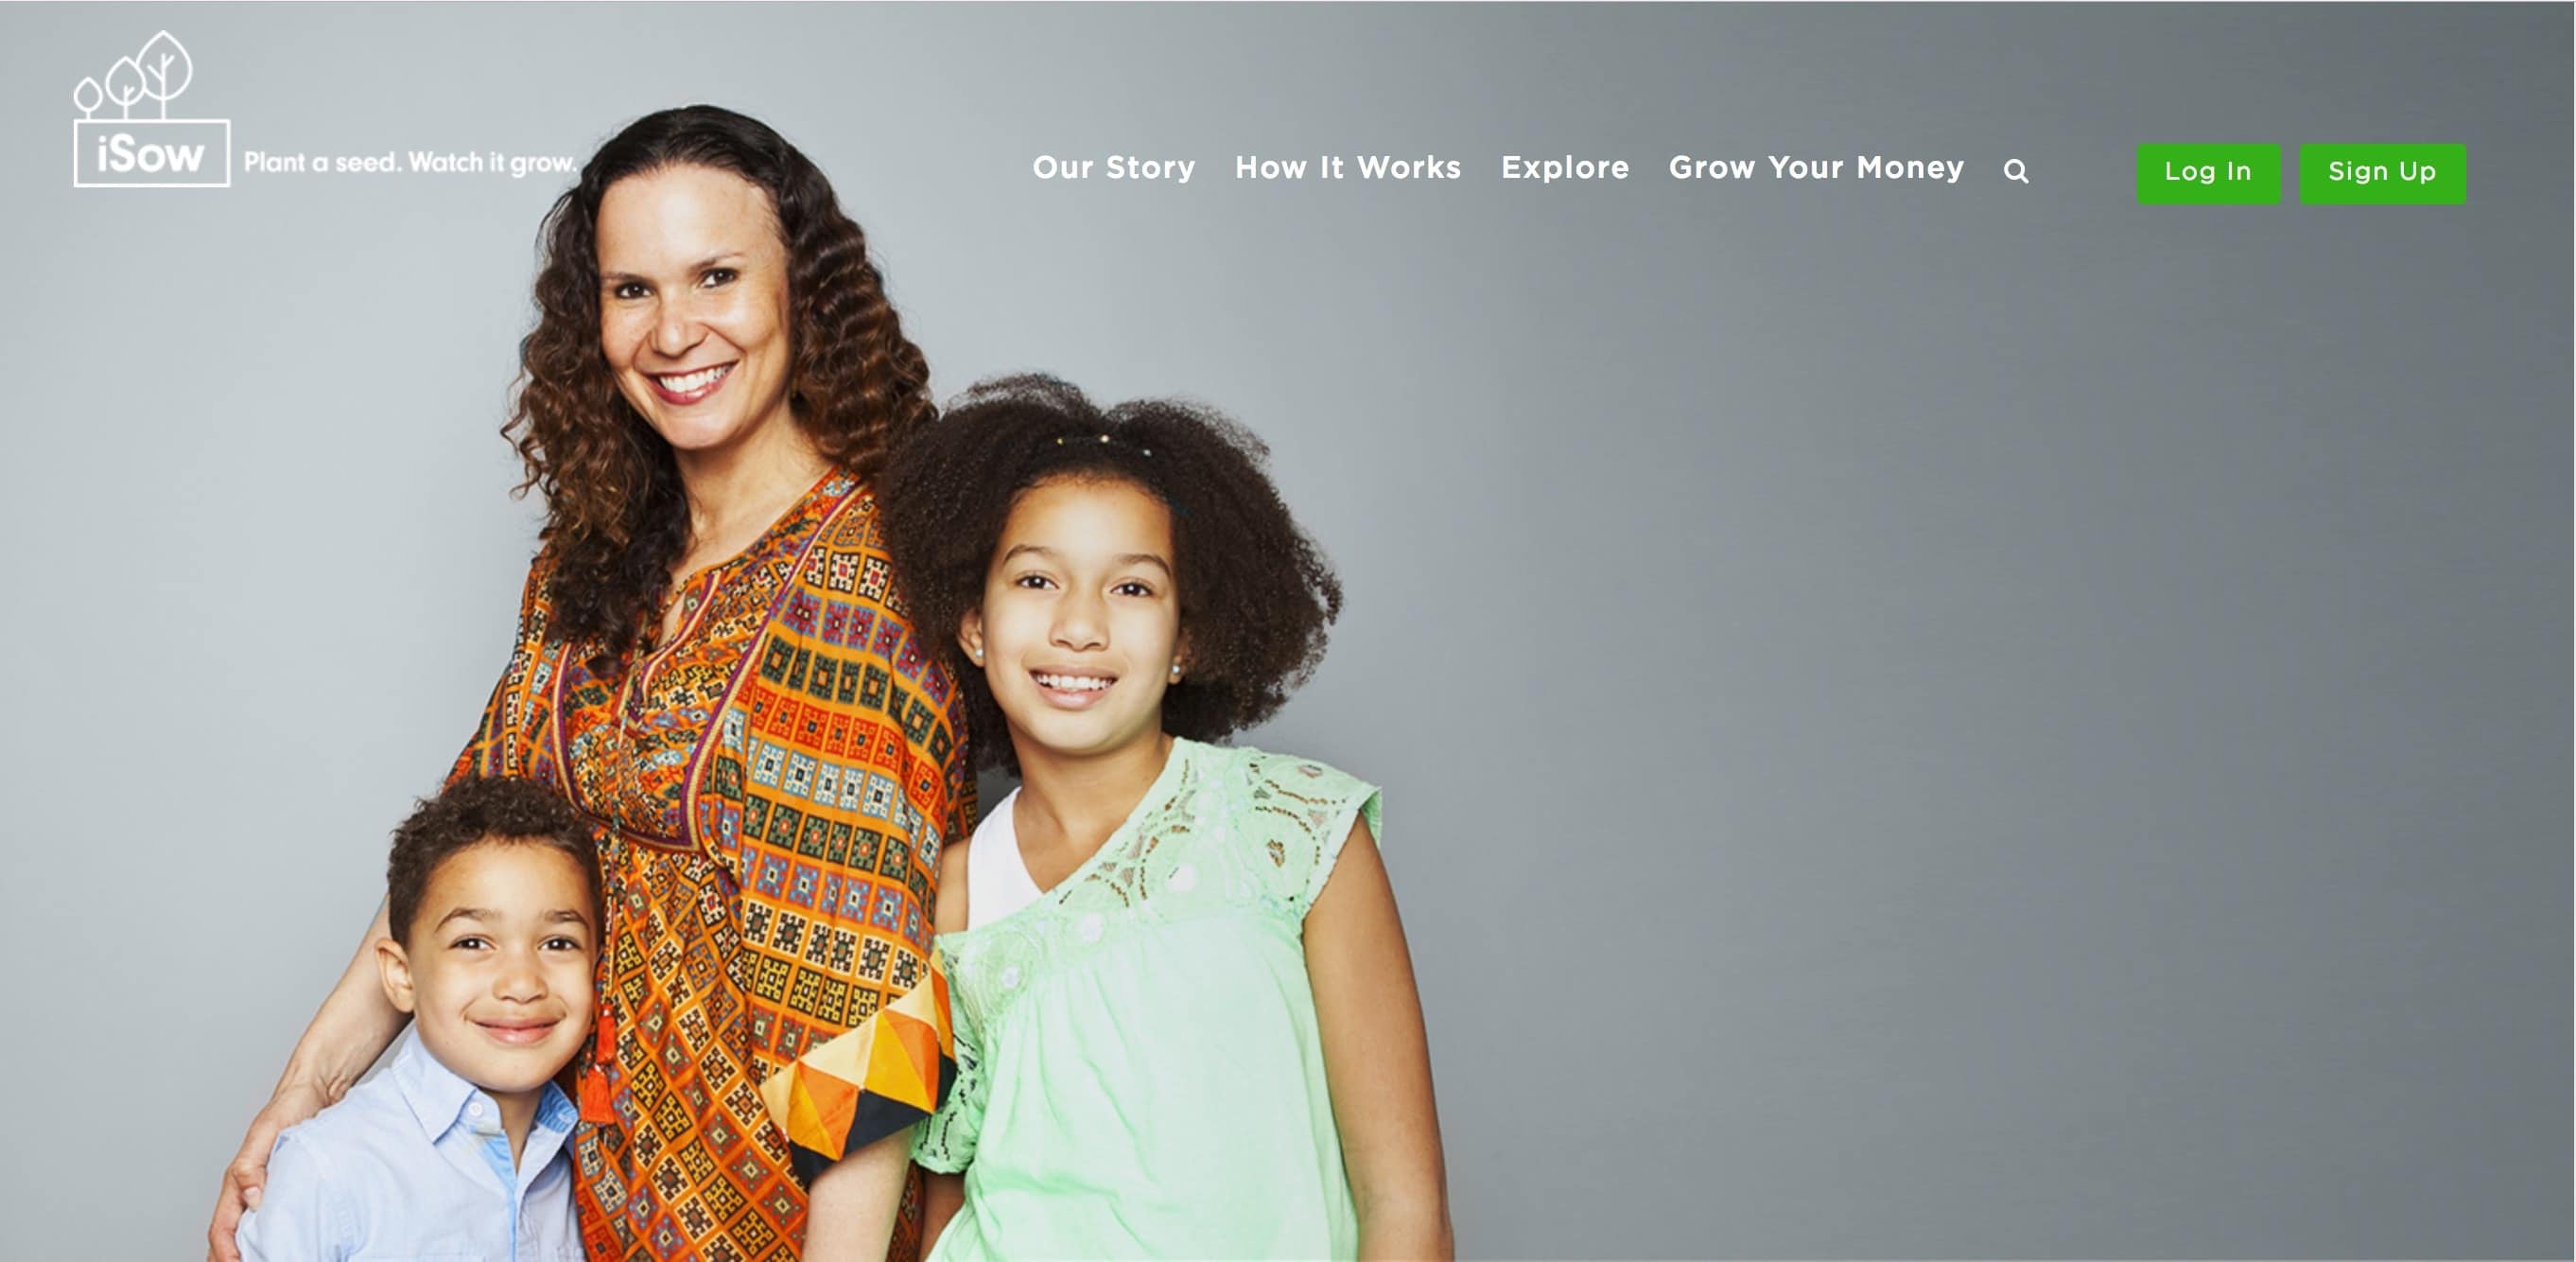 Tanya Van Court, founder and CEO of iSow, with her two children Gabrielle and Hendrix